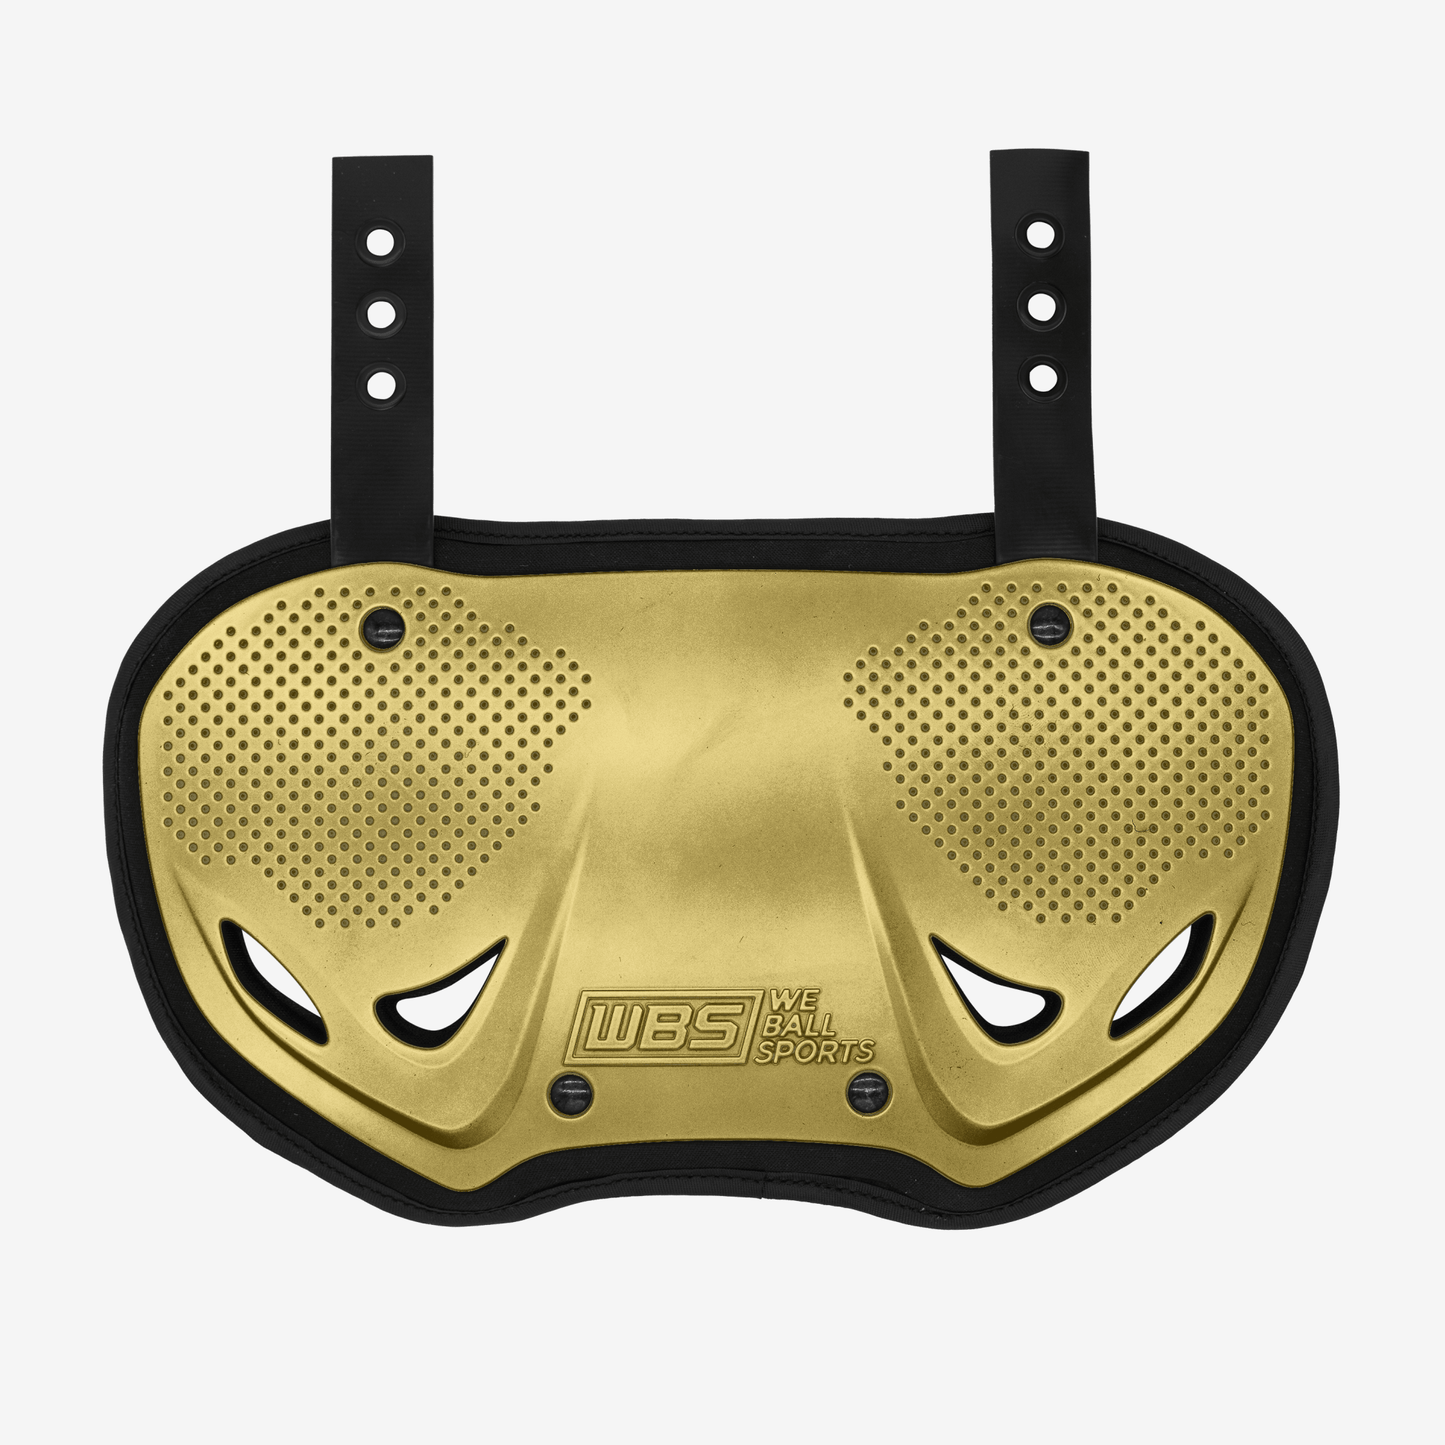 WE BALL SPORTS FOOTBALL BACK PLATE (GOLD) - We Ball Sports